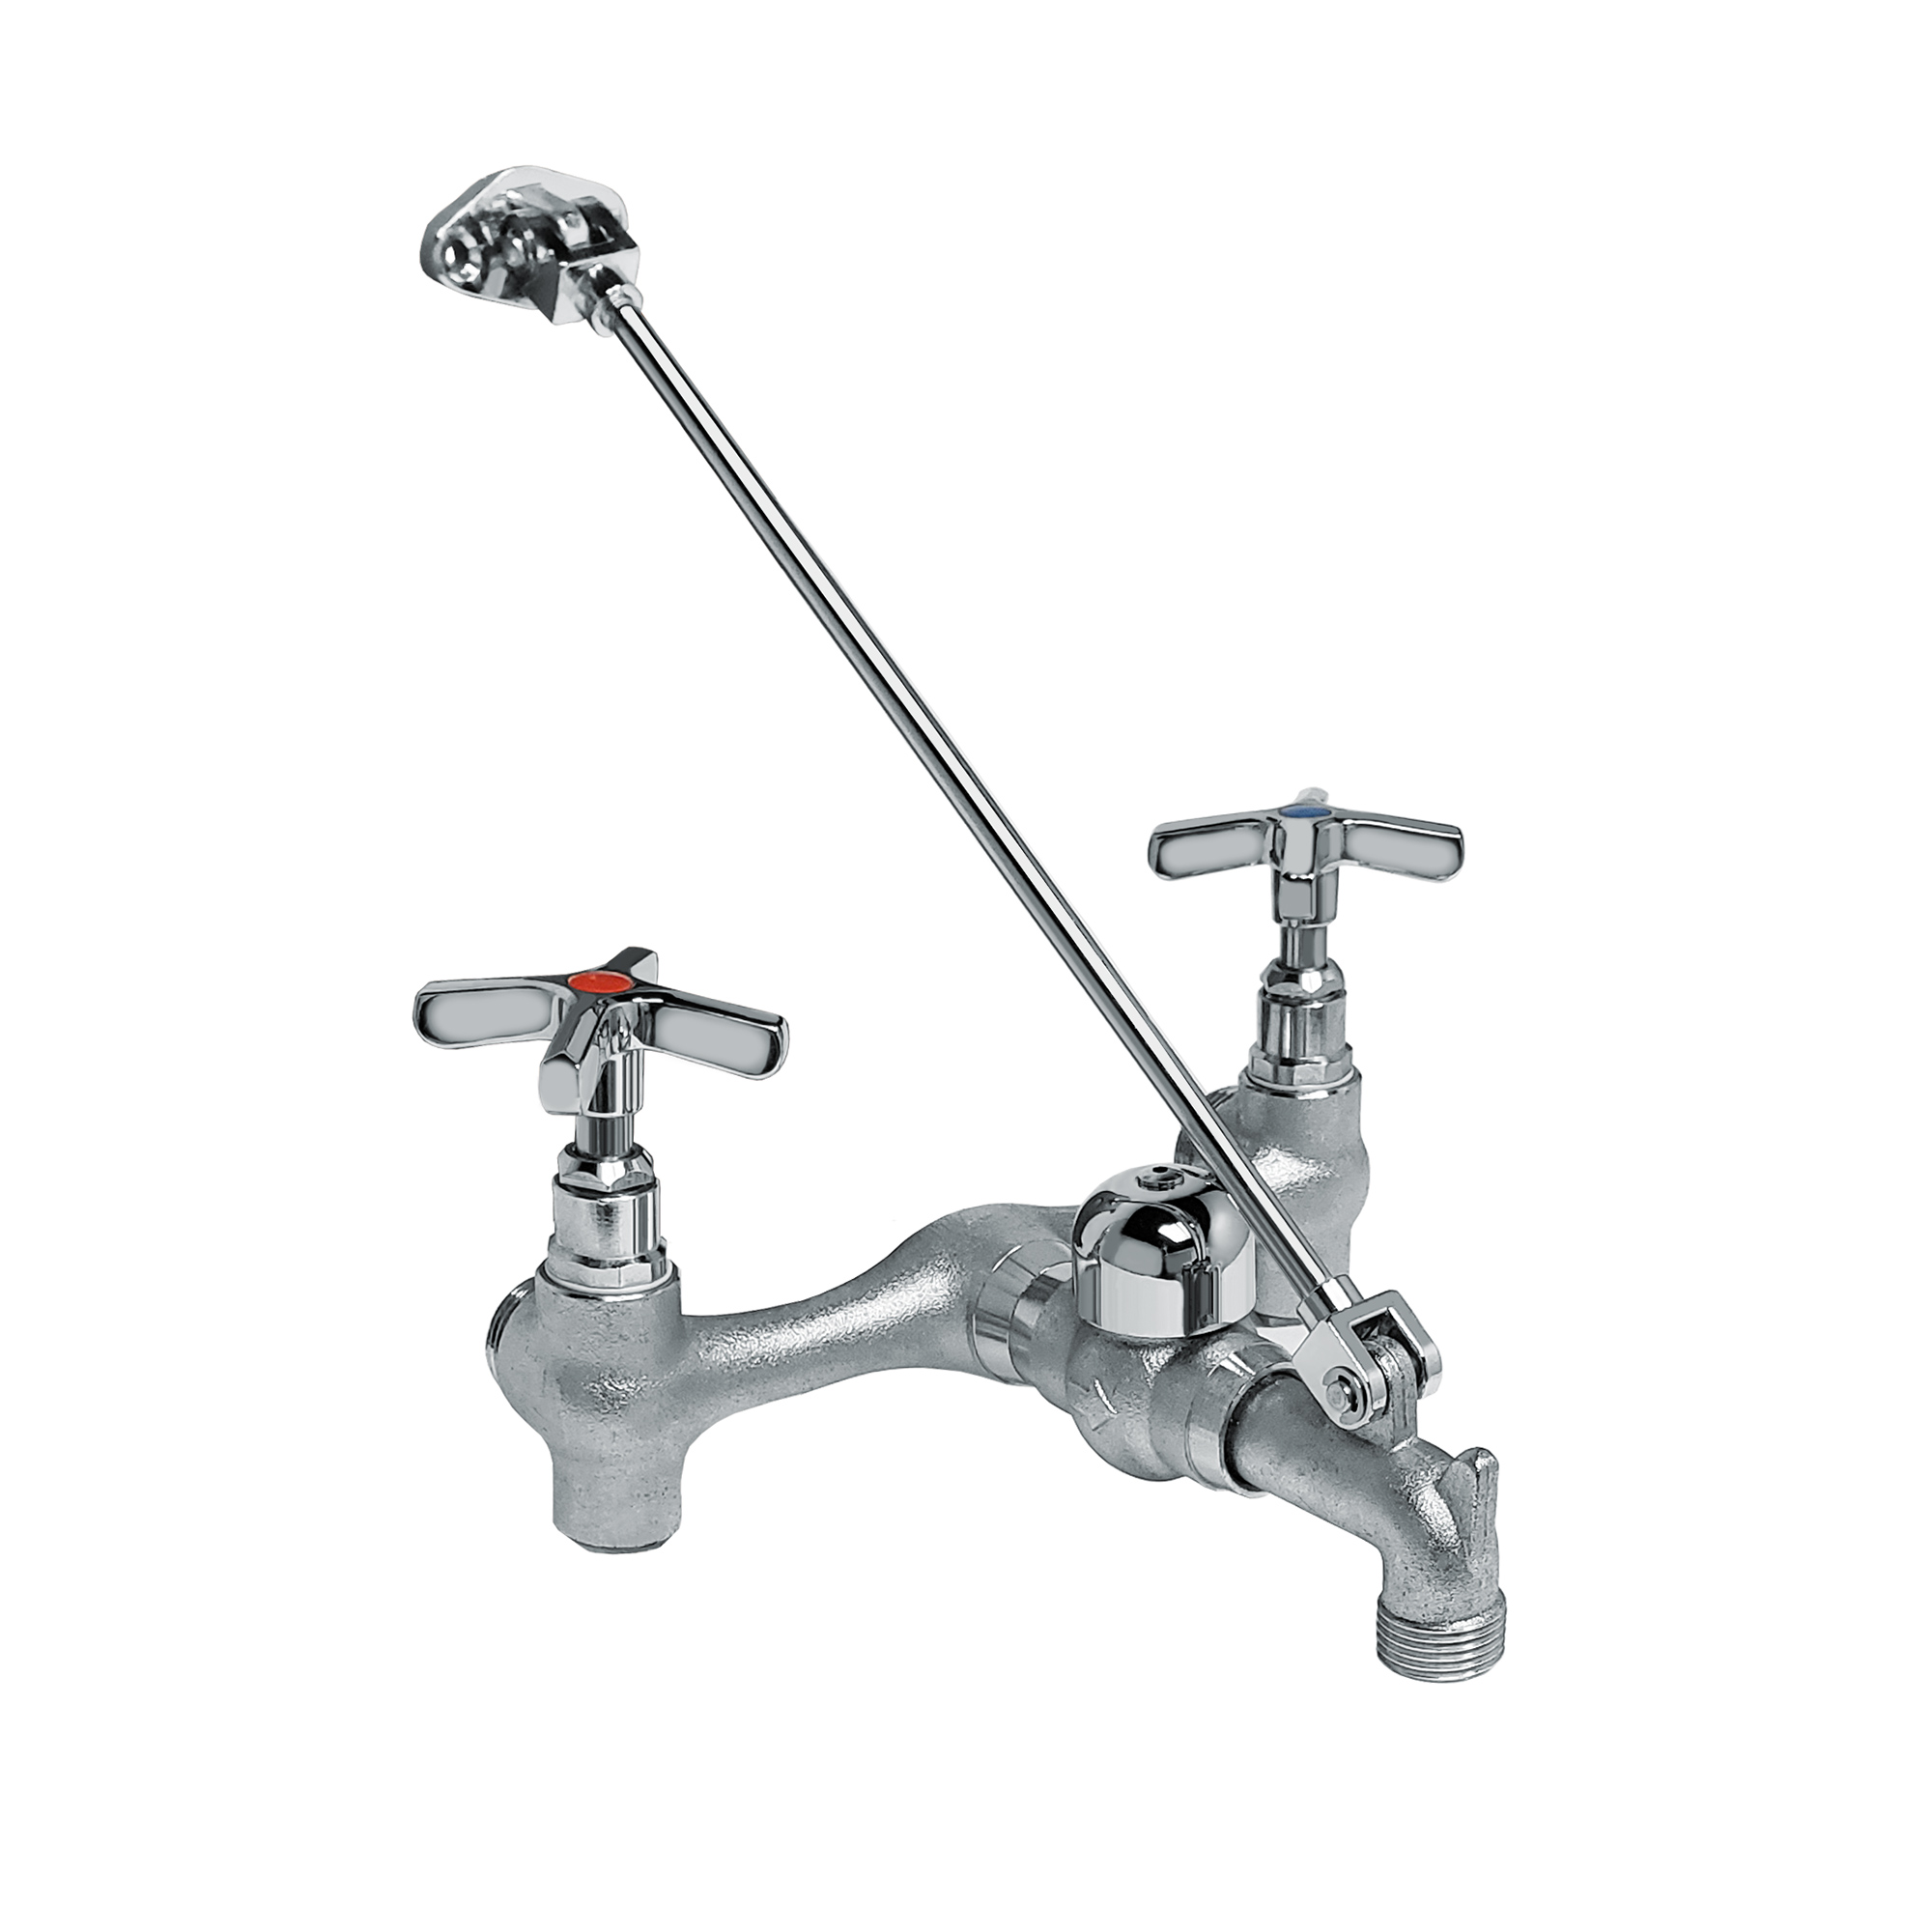 Heavy Duty wall mount service sink faucet with support bracket and cross handles